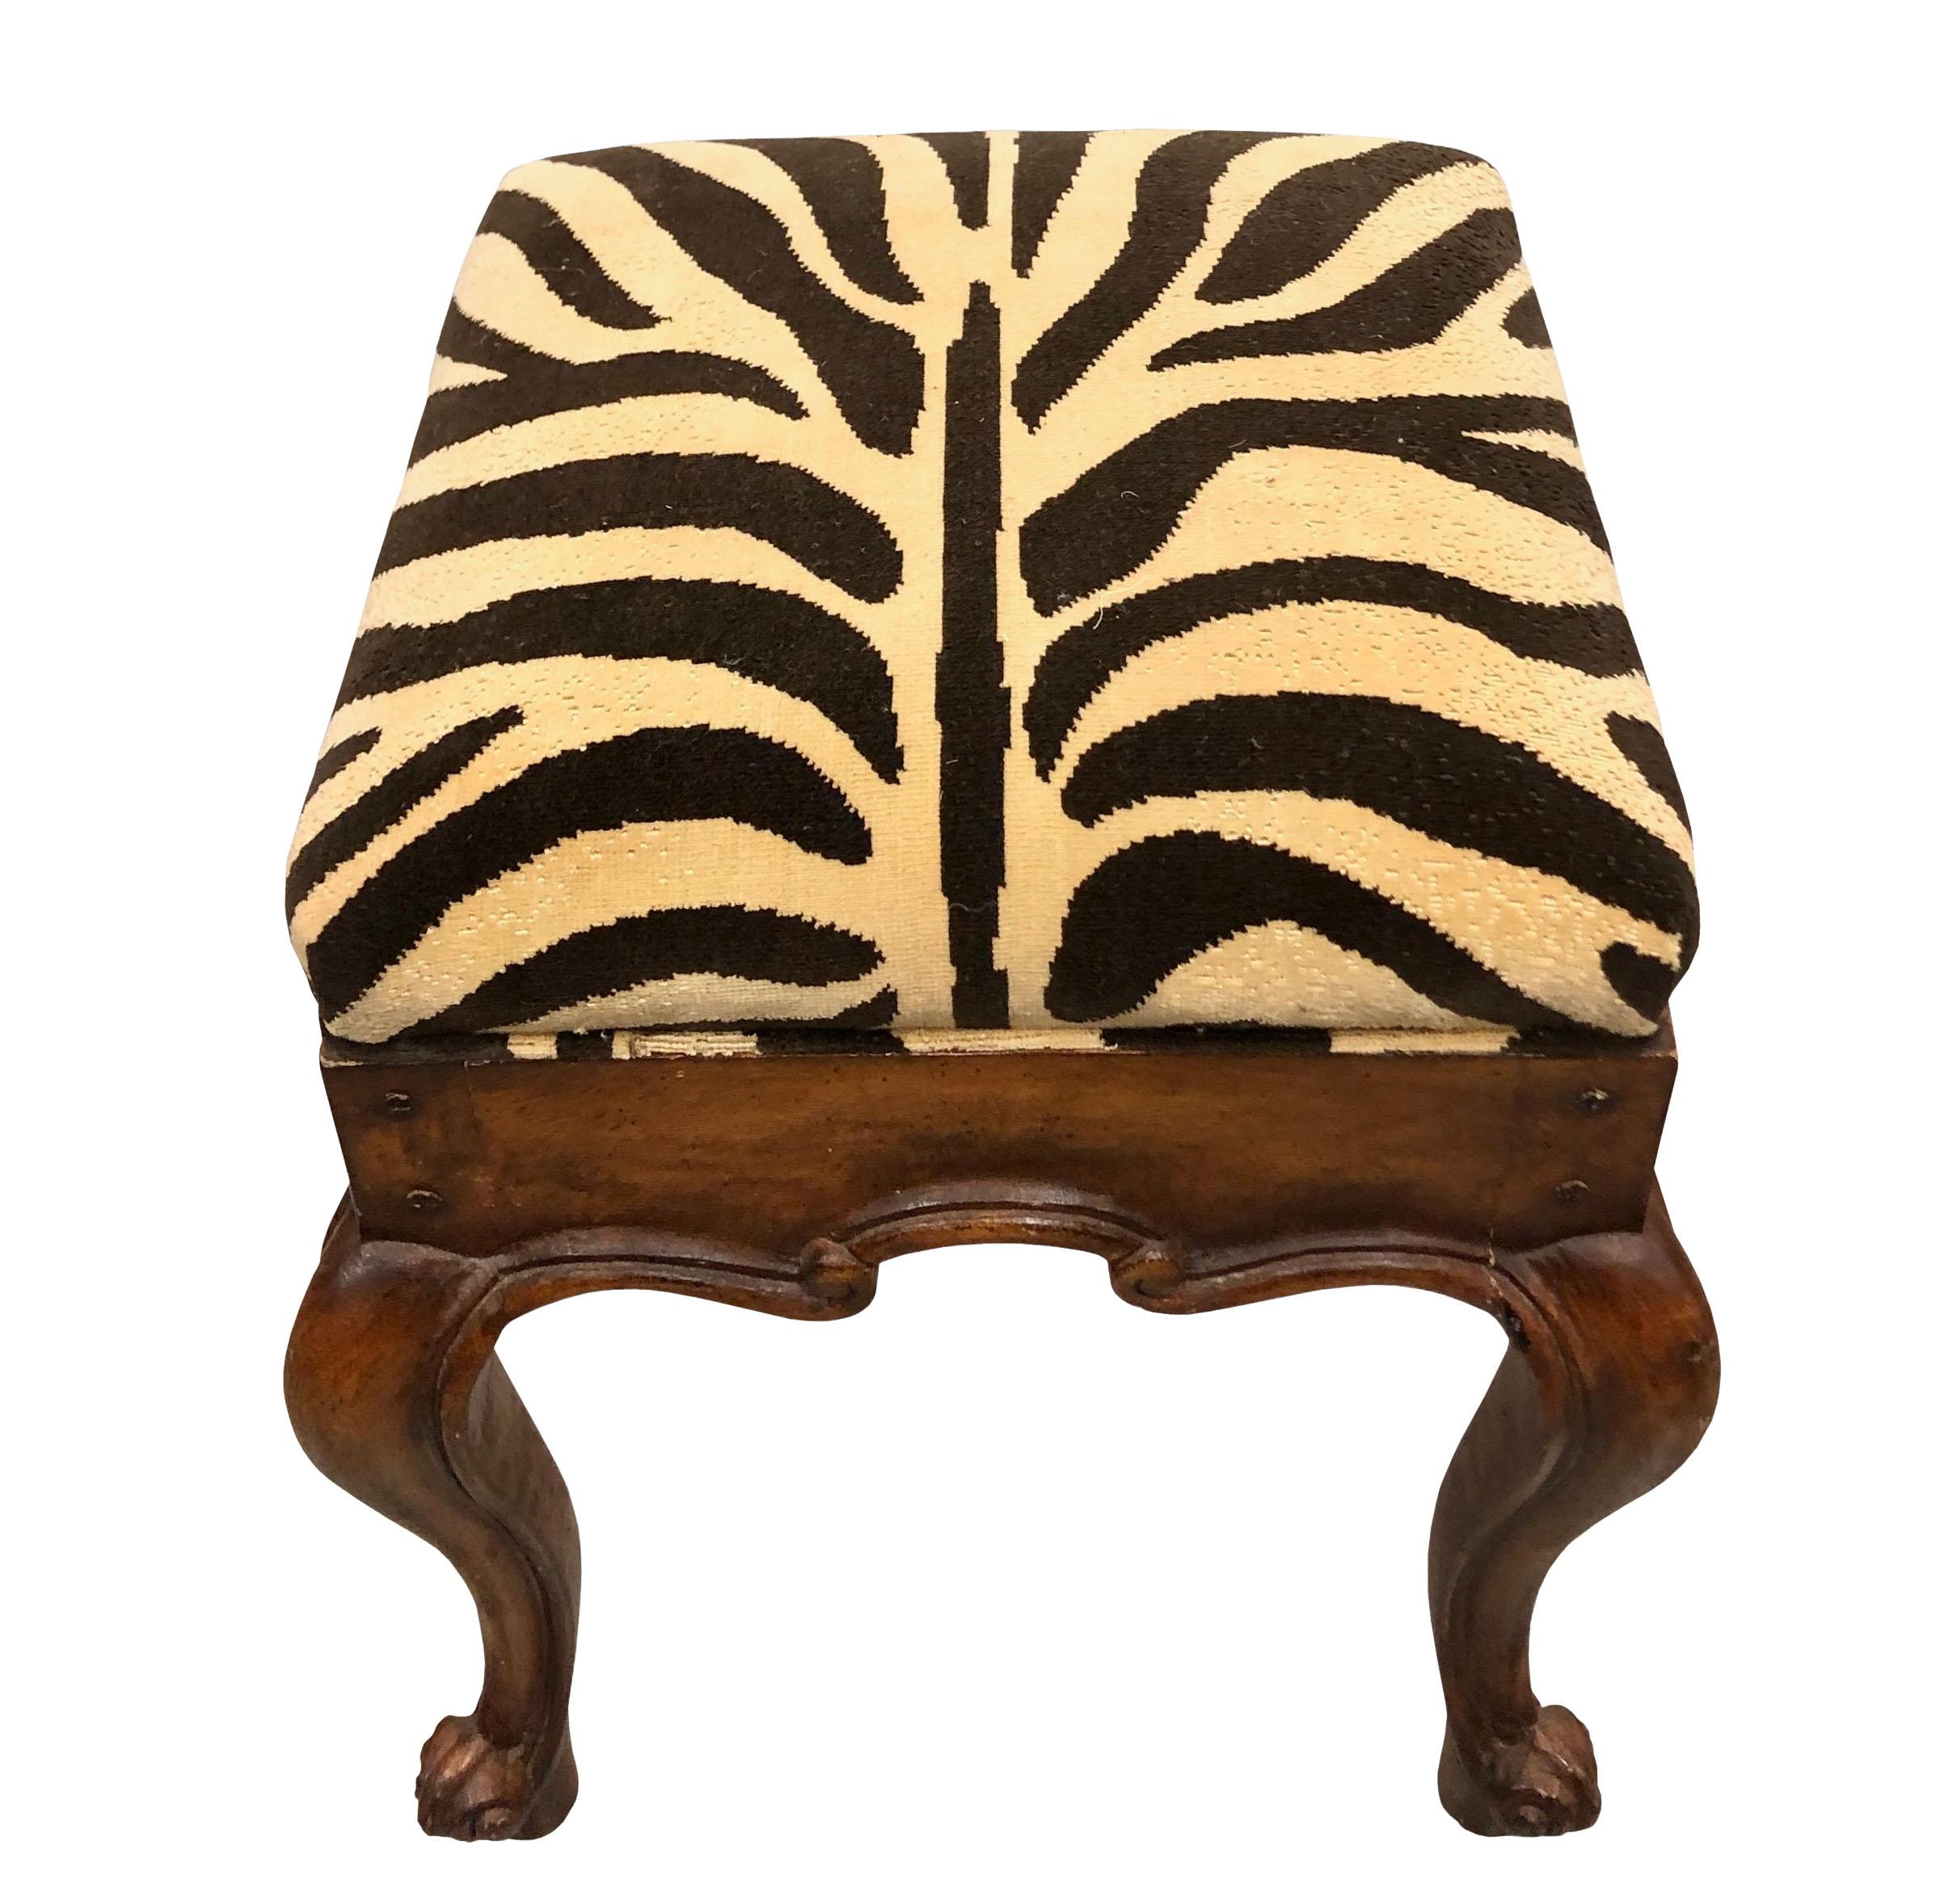 Vintage Zebra Stool In Good Condition For Sale In Tampa, FL